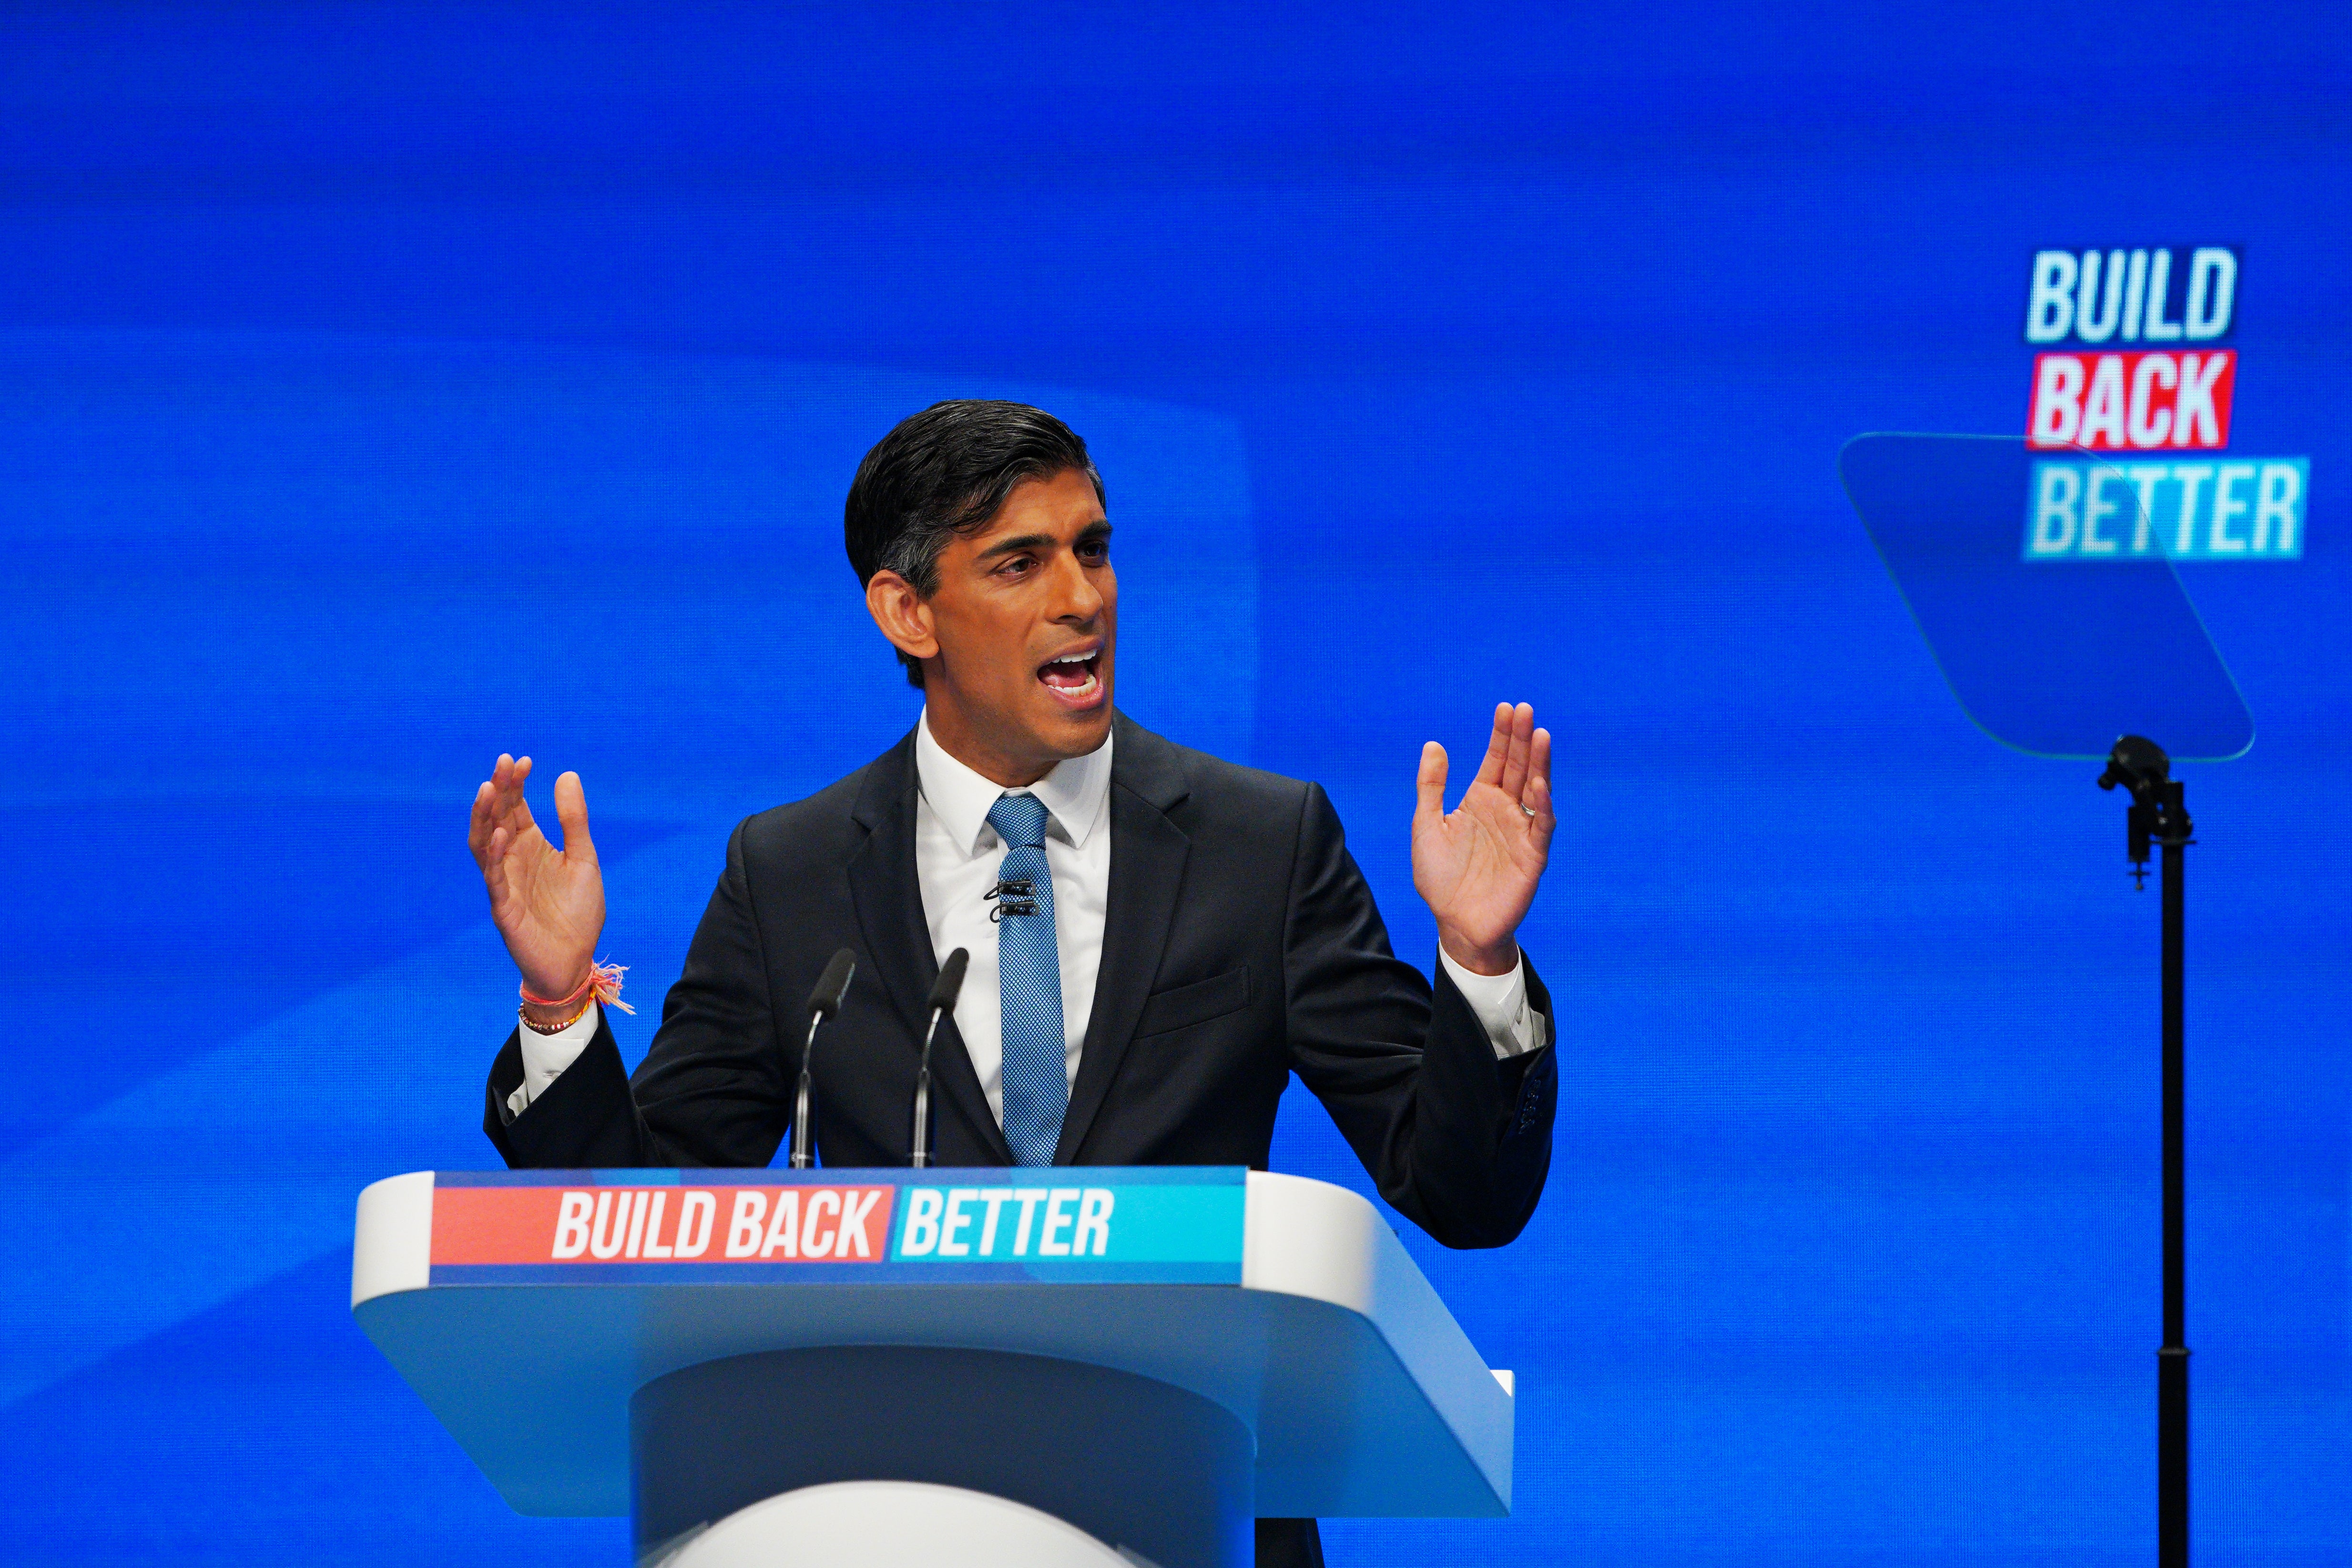 Chancellor Rishi Sunak speaking at the Conservative Party conference in Manchester (Peter Byrne/PA)